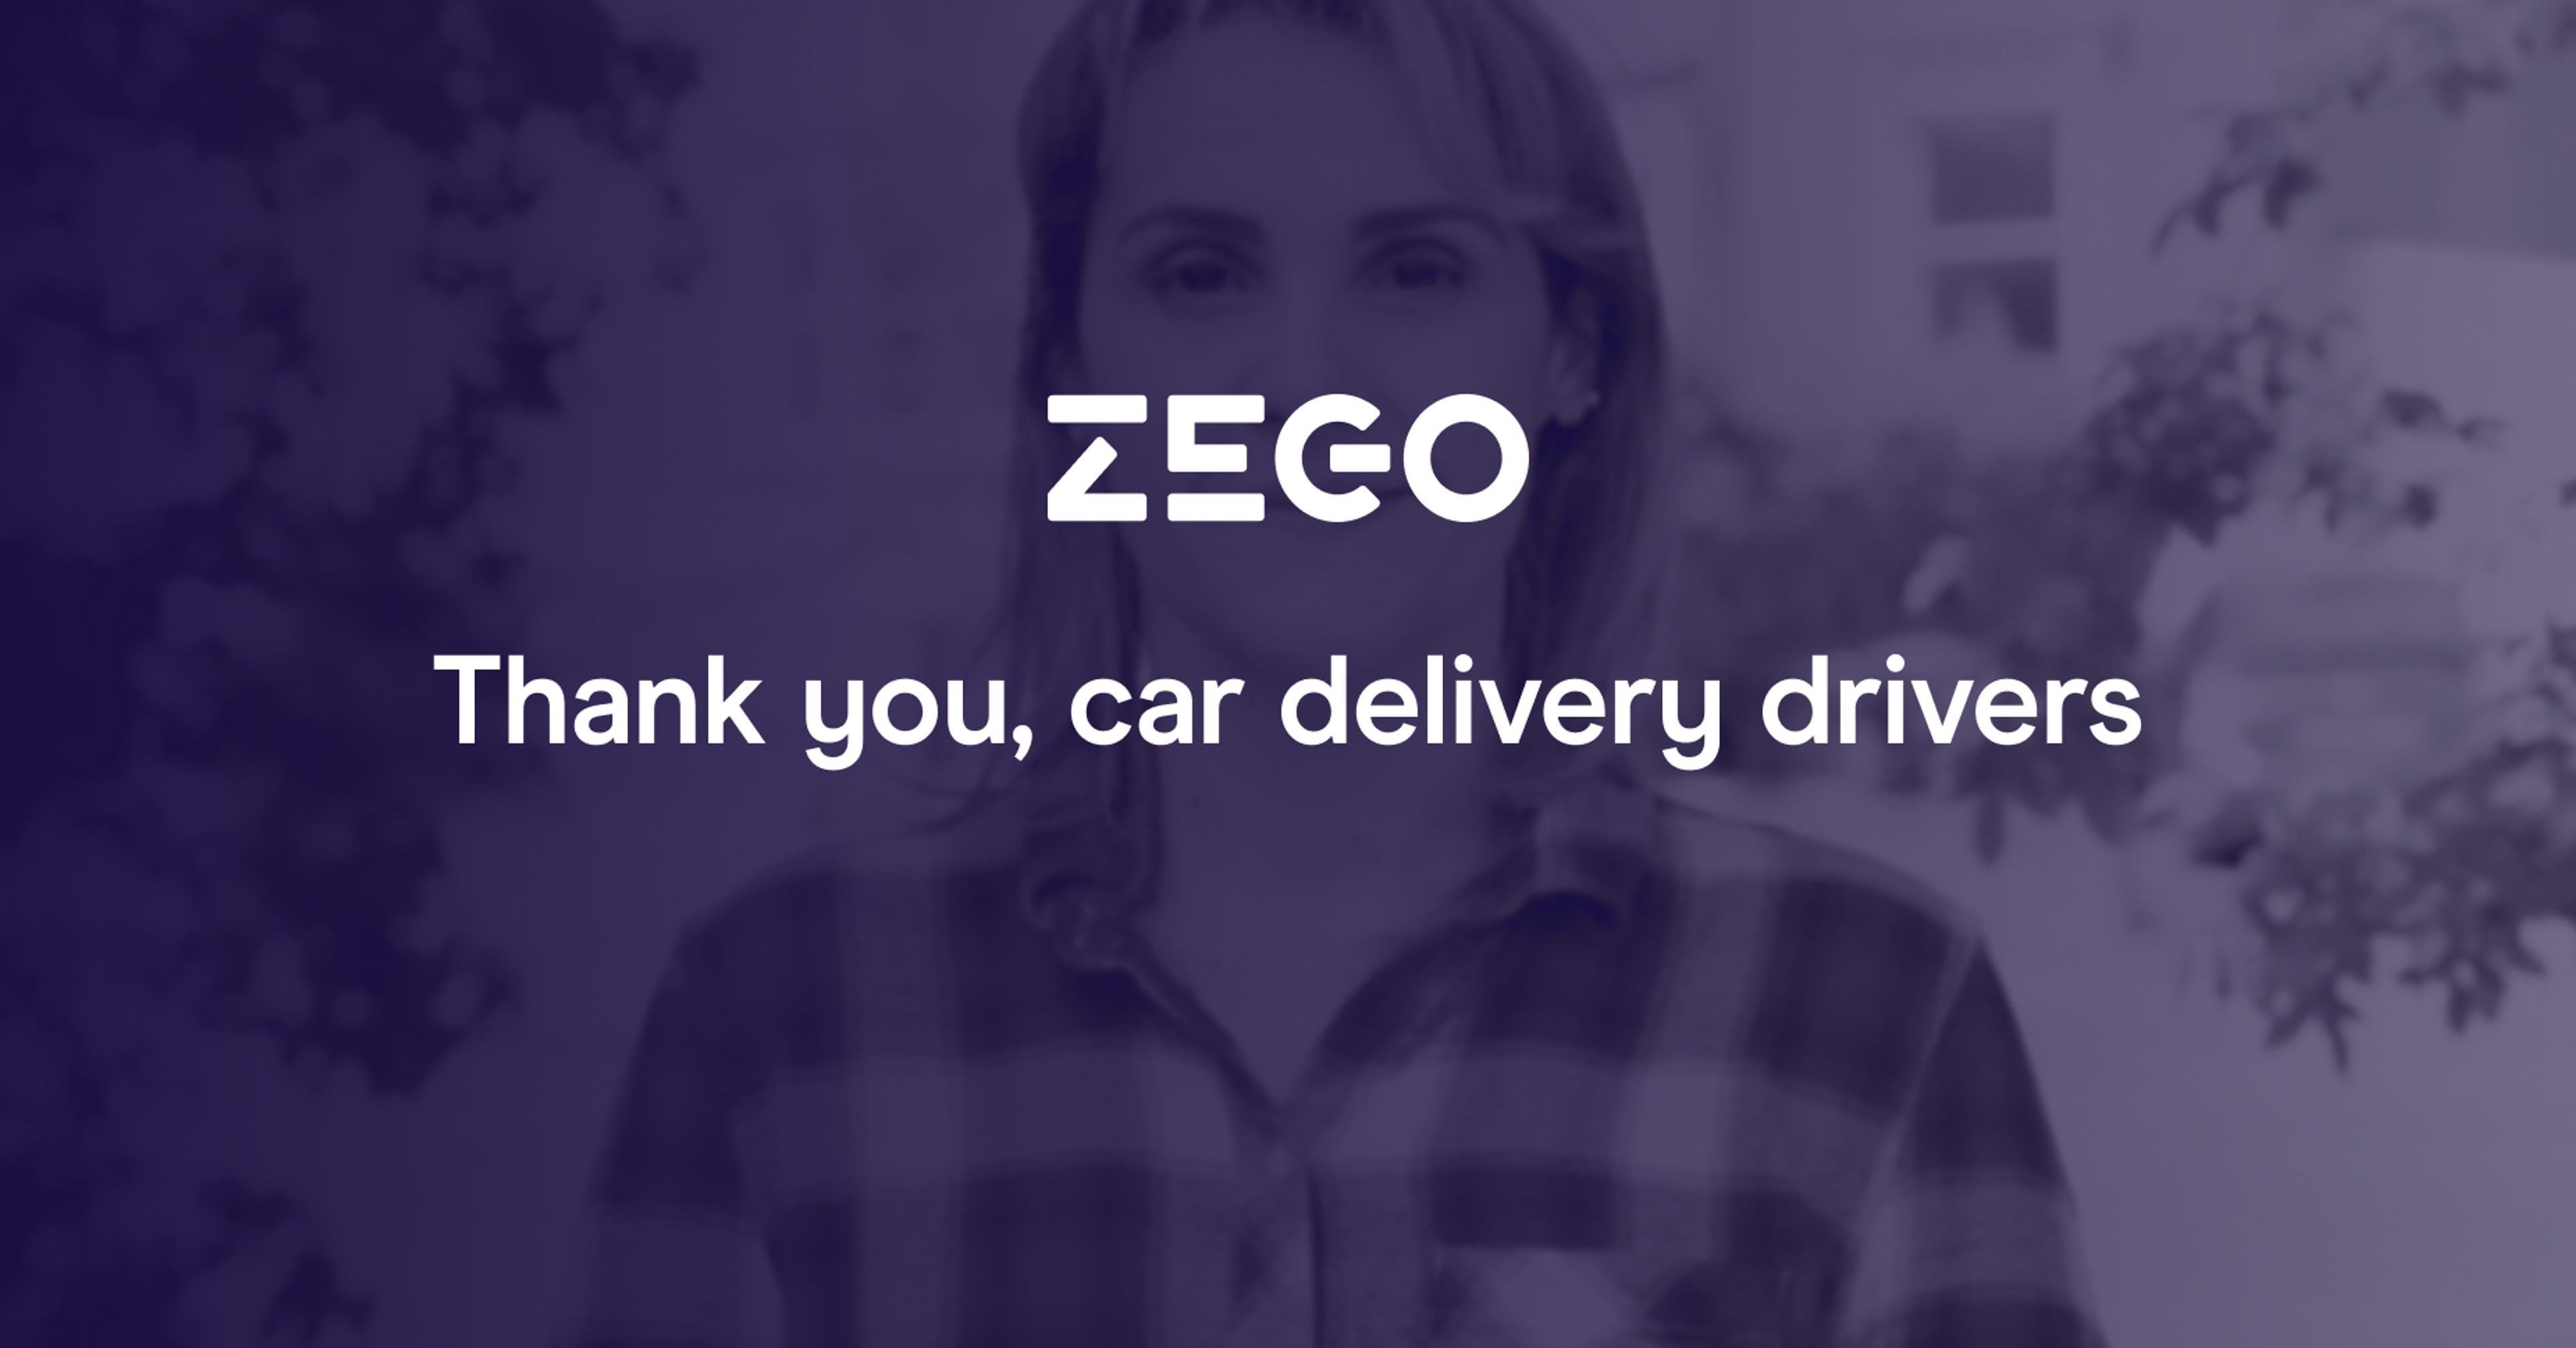 Thank you, car delivery drivers